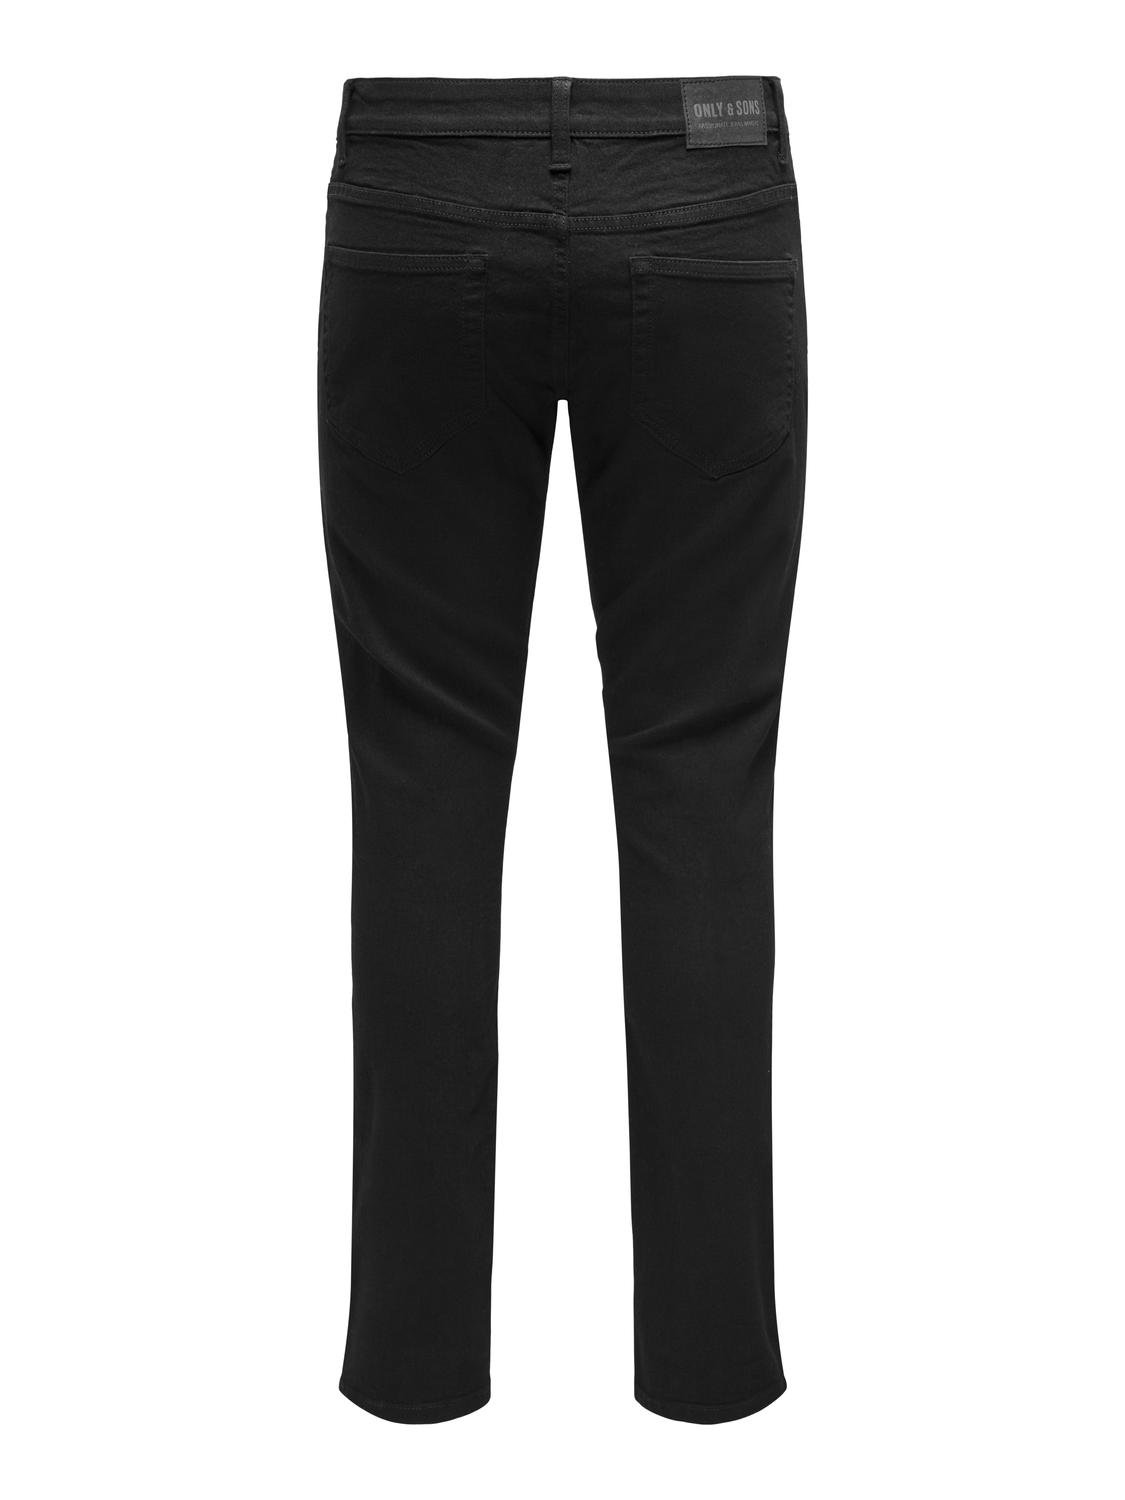 Slim Fit Mid Rise Jeans | Schwarz | ONLY & SONS®